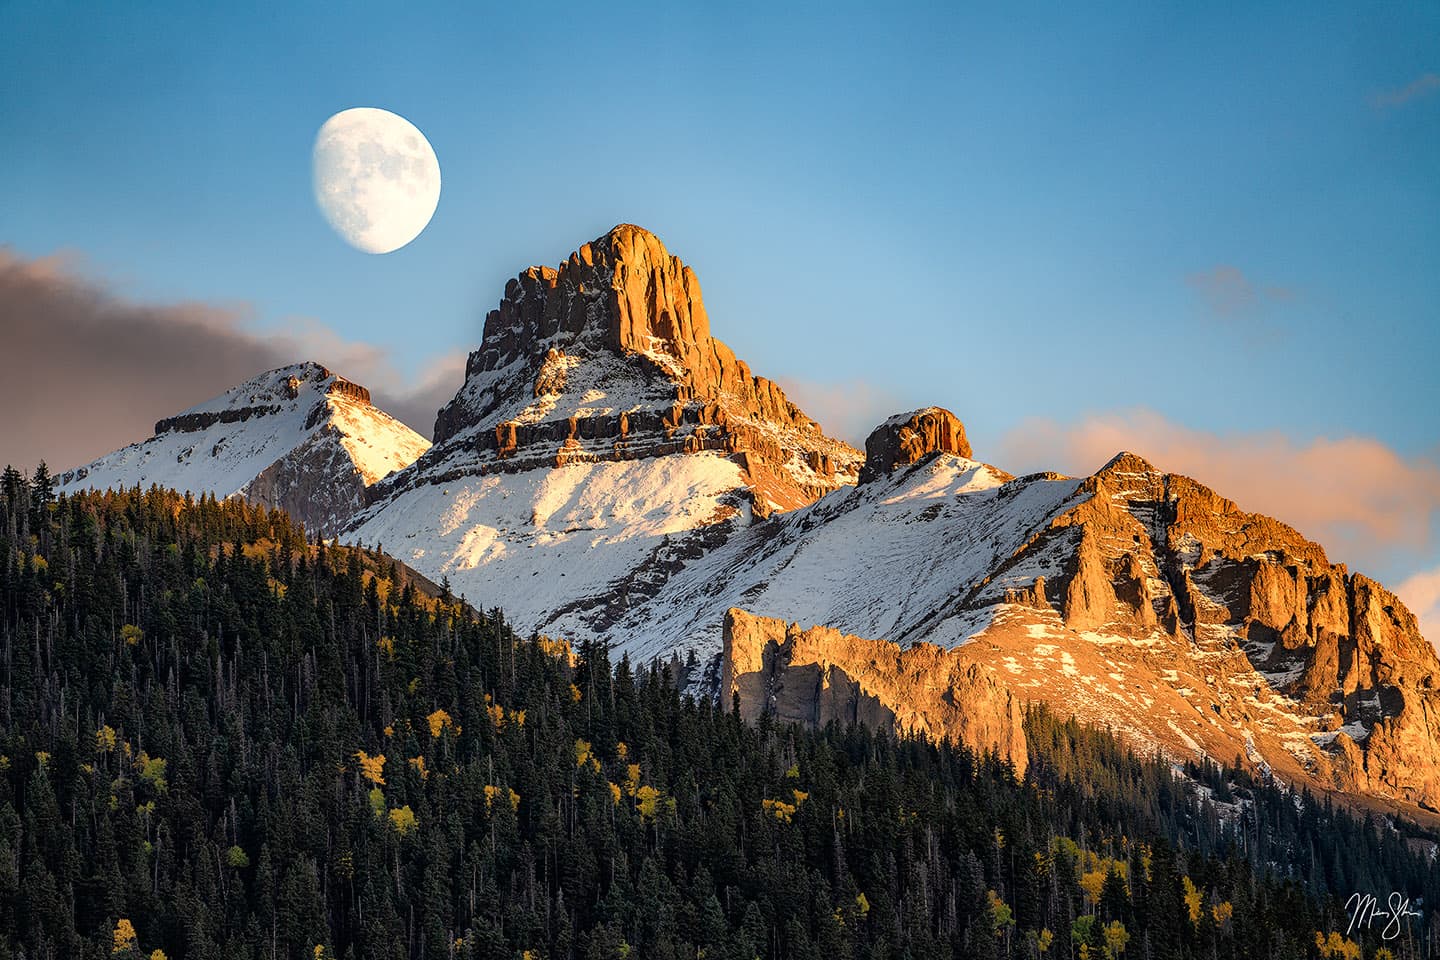 The moon rises over Mount Sneffels